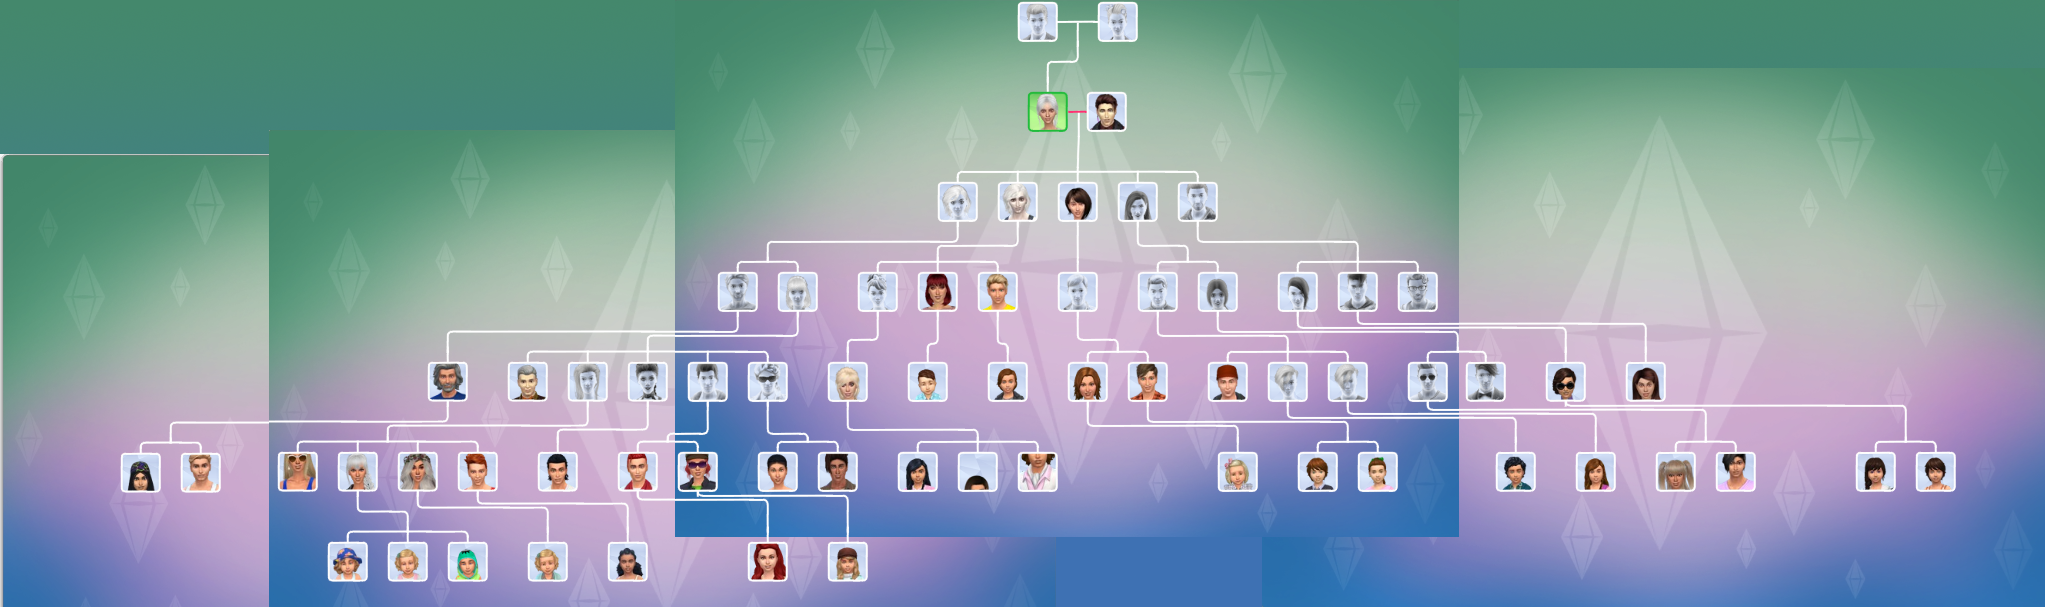 sims-4-family-tree-timspire